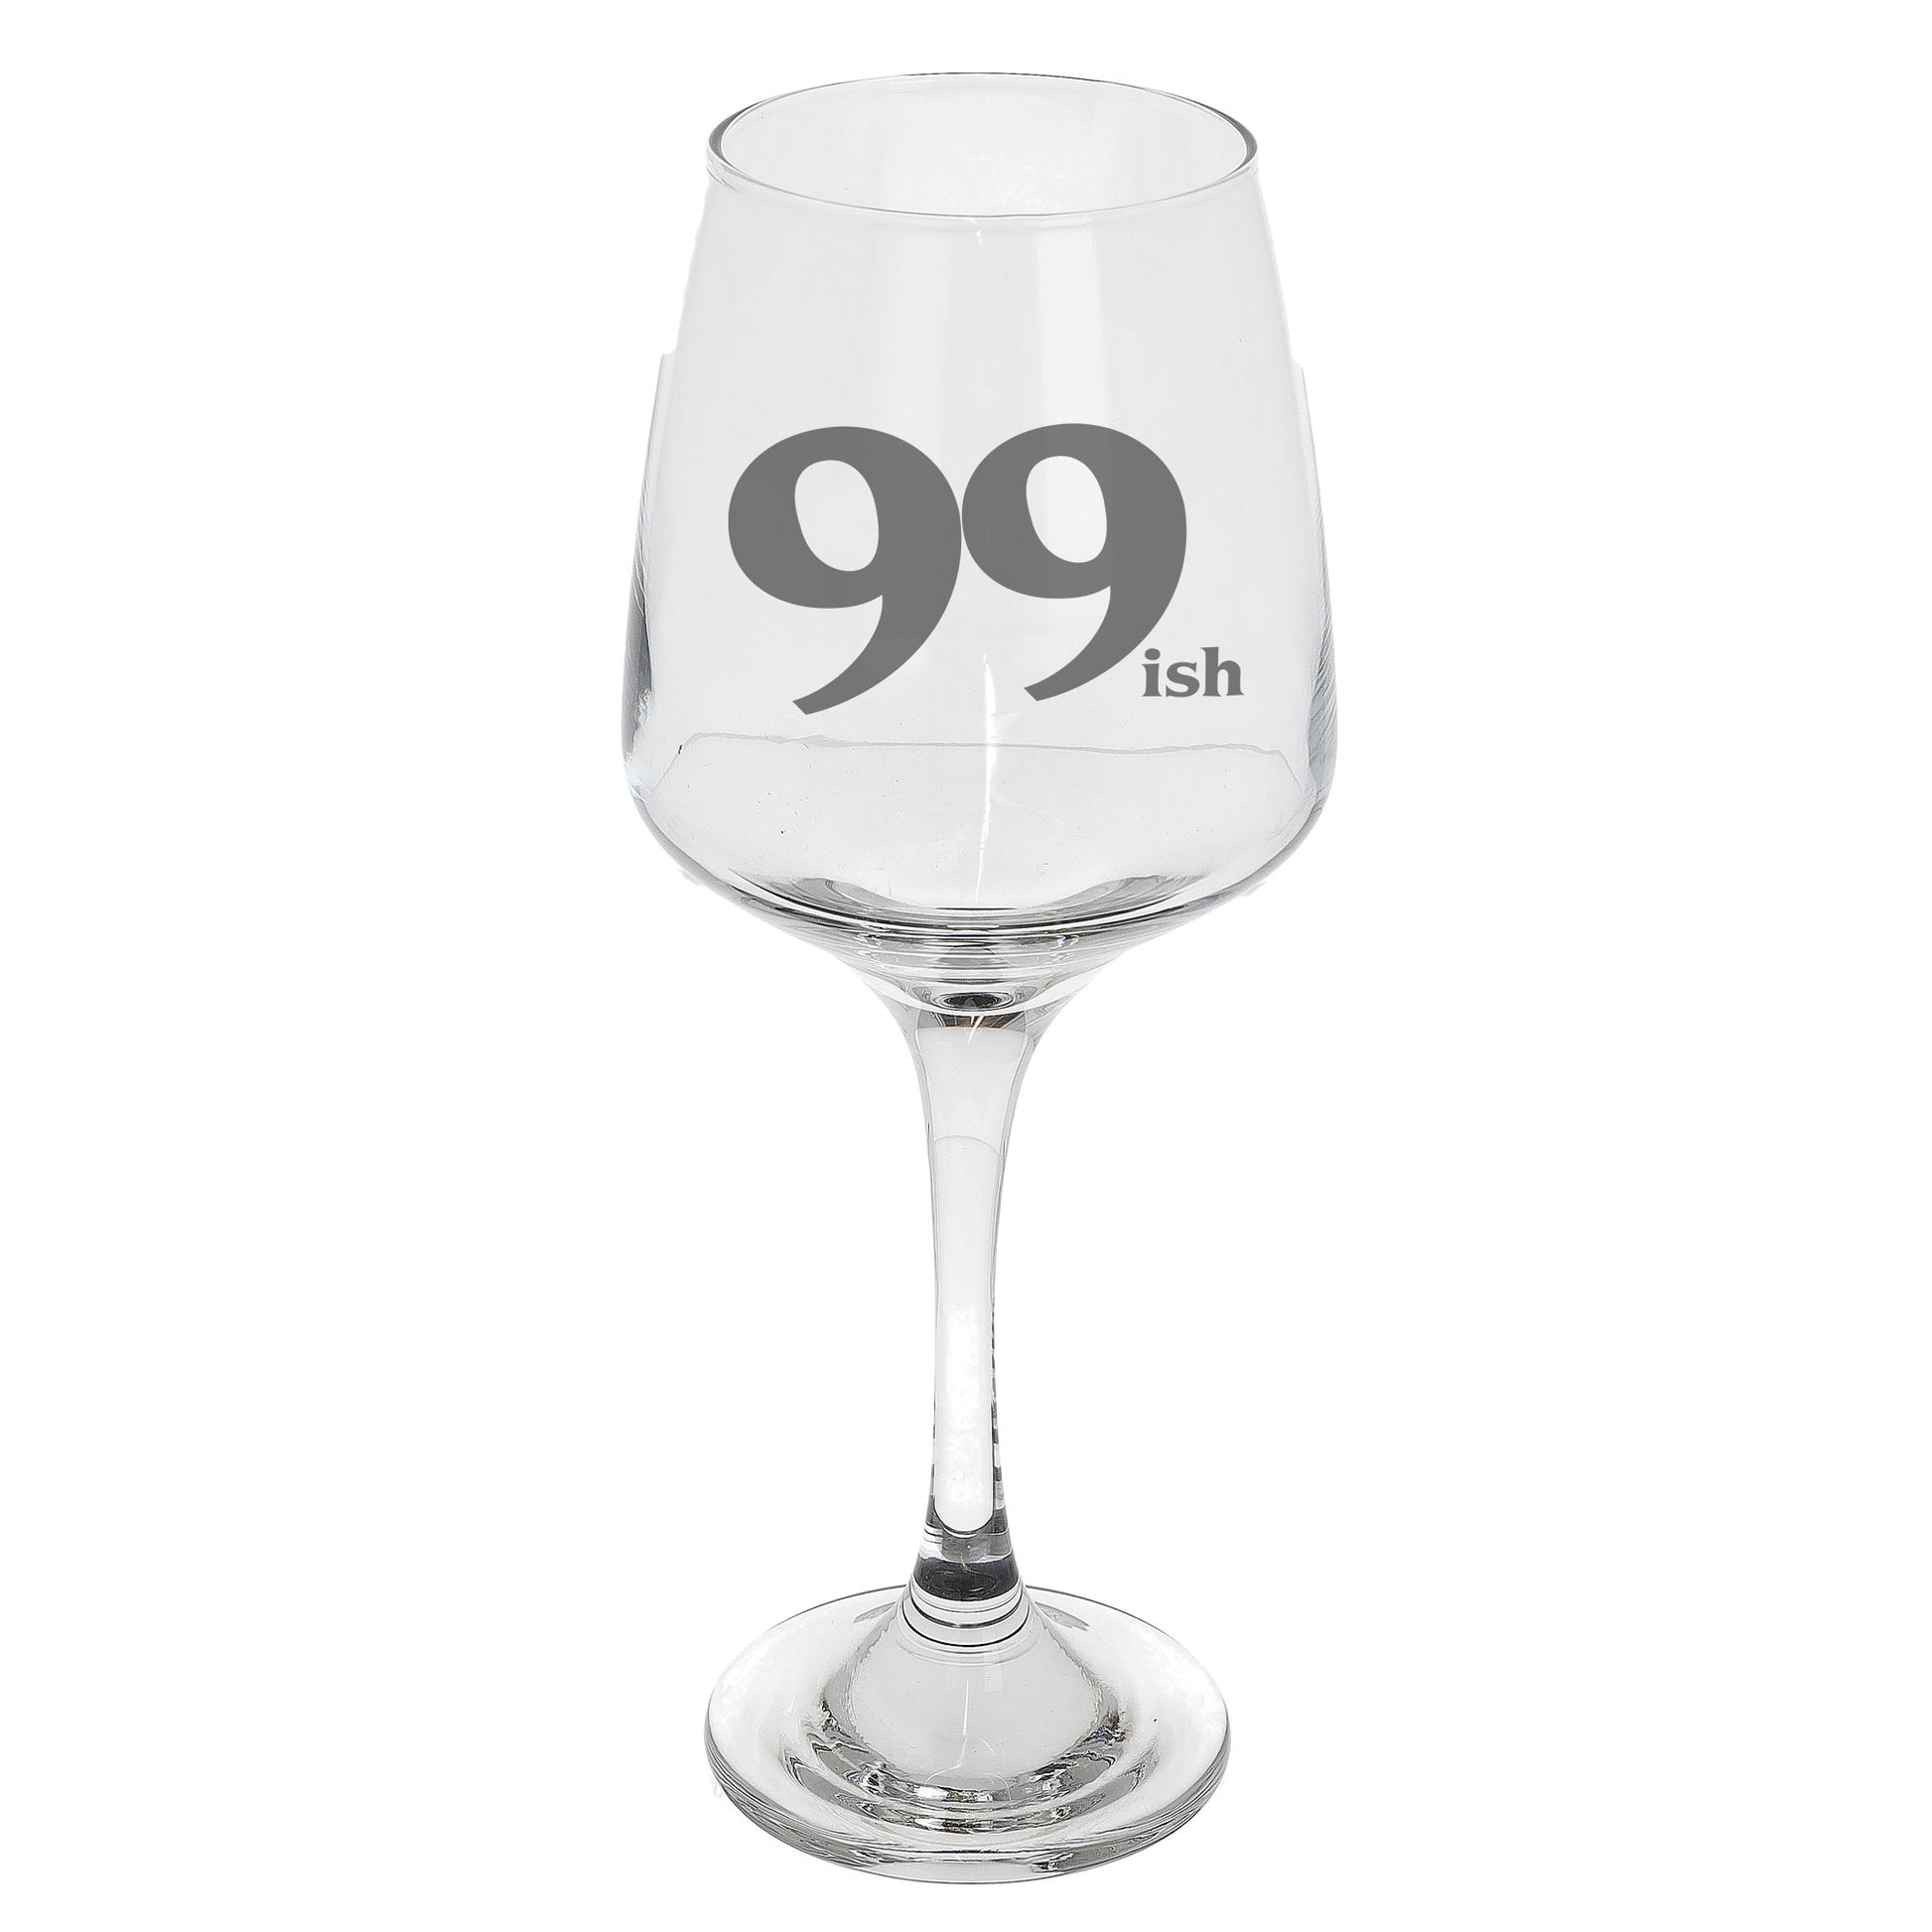 99ish Wine Glass and/or Coaster Set  - Always Looking Good - Wine Glass On Its Own  